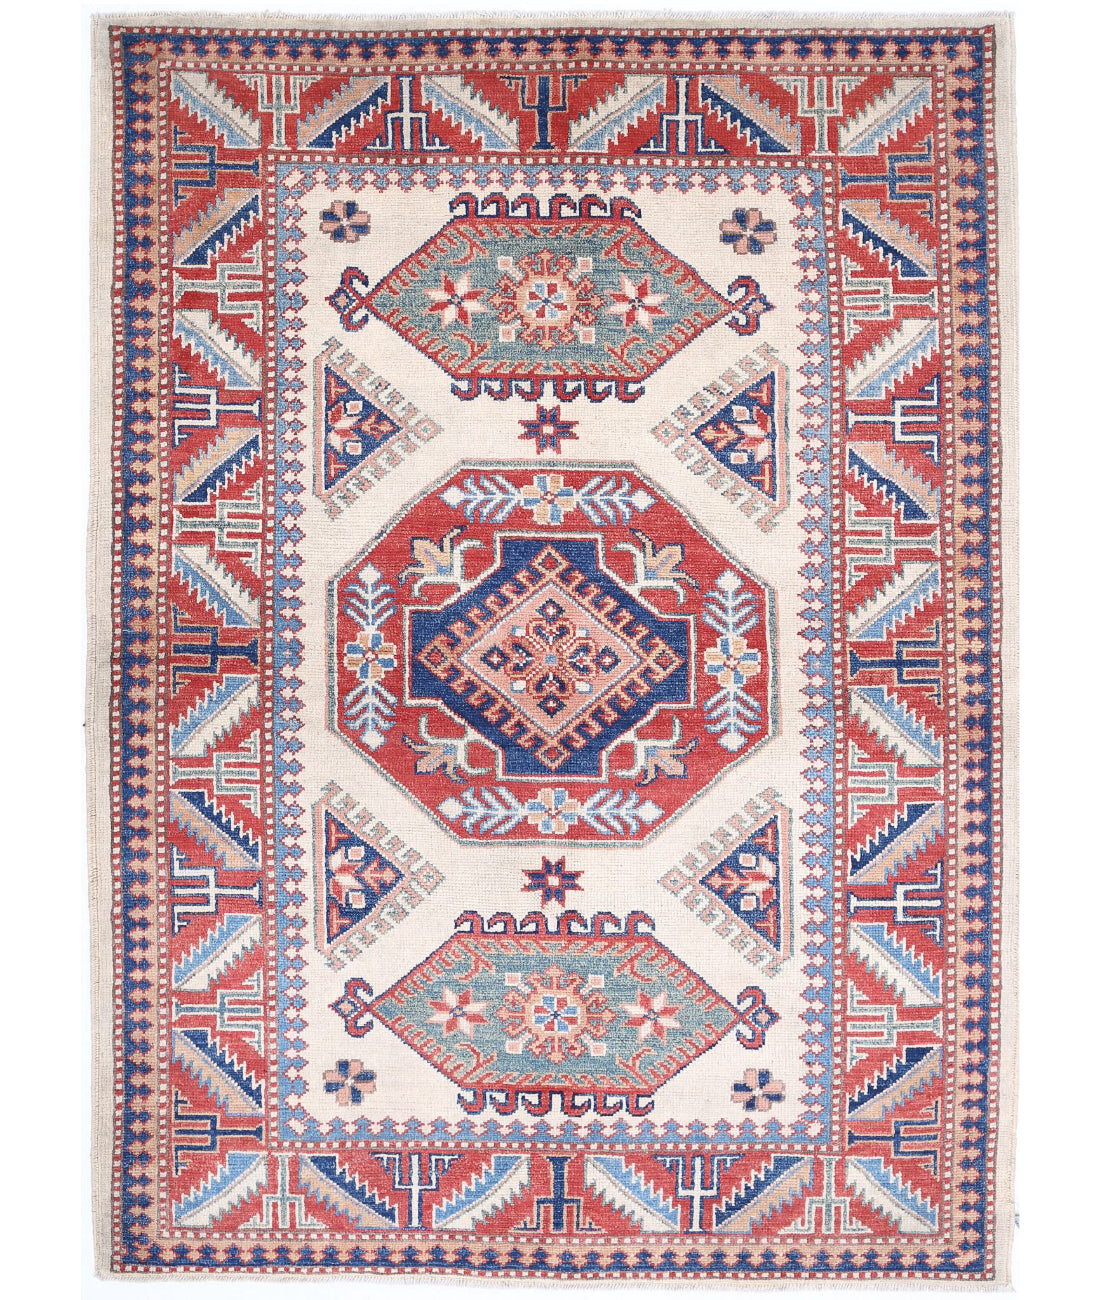 Hand Knotted Tribal Kazak Wool Rug - 4'2'' x 6'0'' 4'2'' x 6'0'' (125 X 180) / Ivory / Red